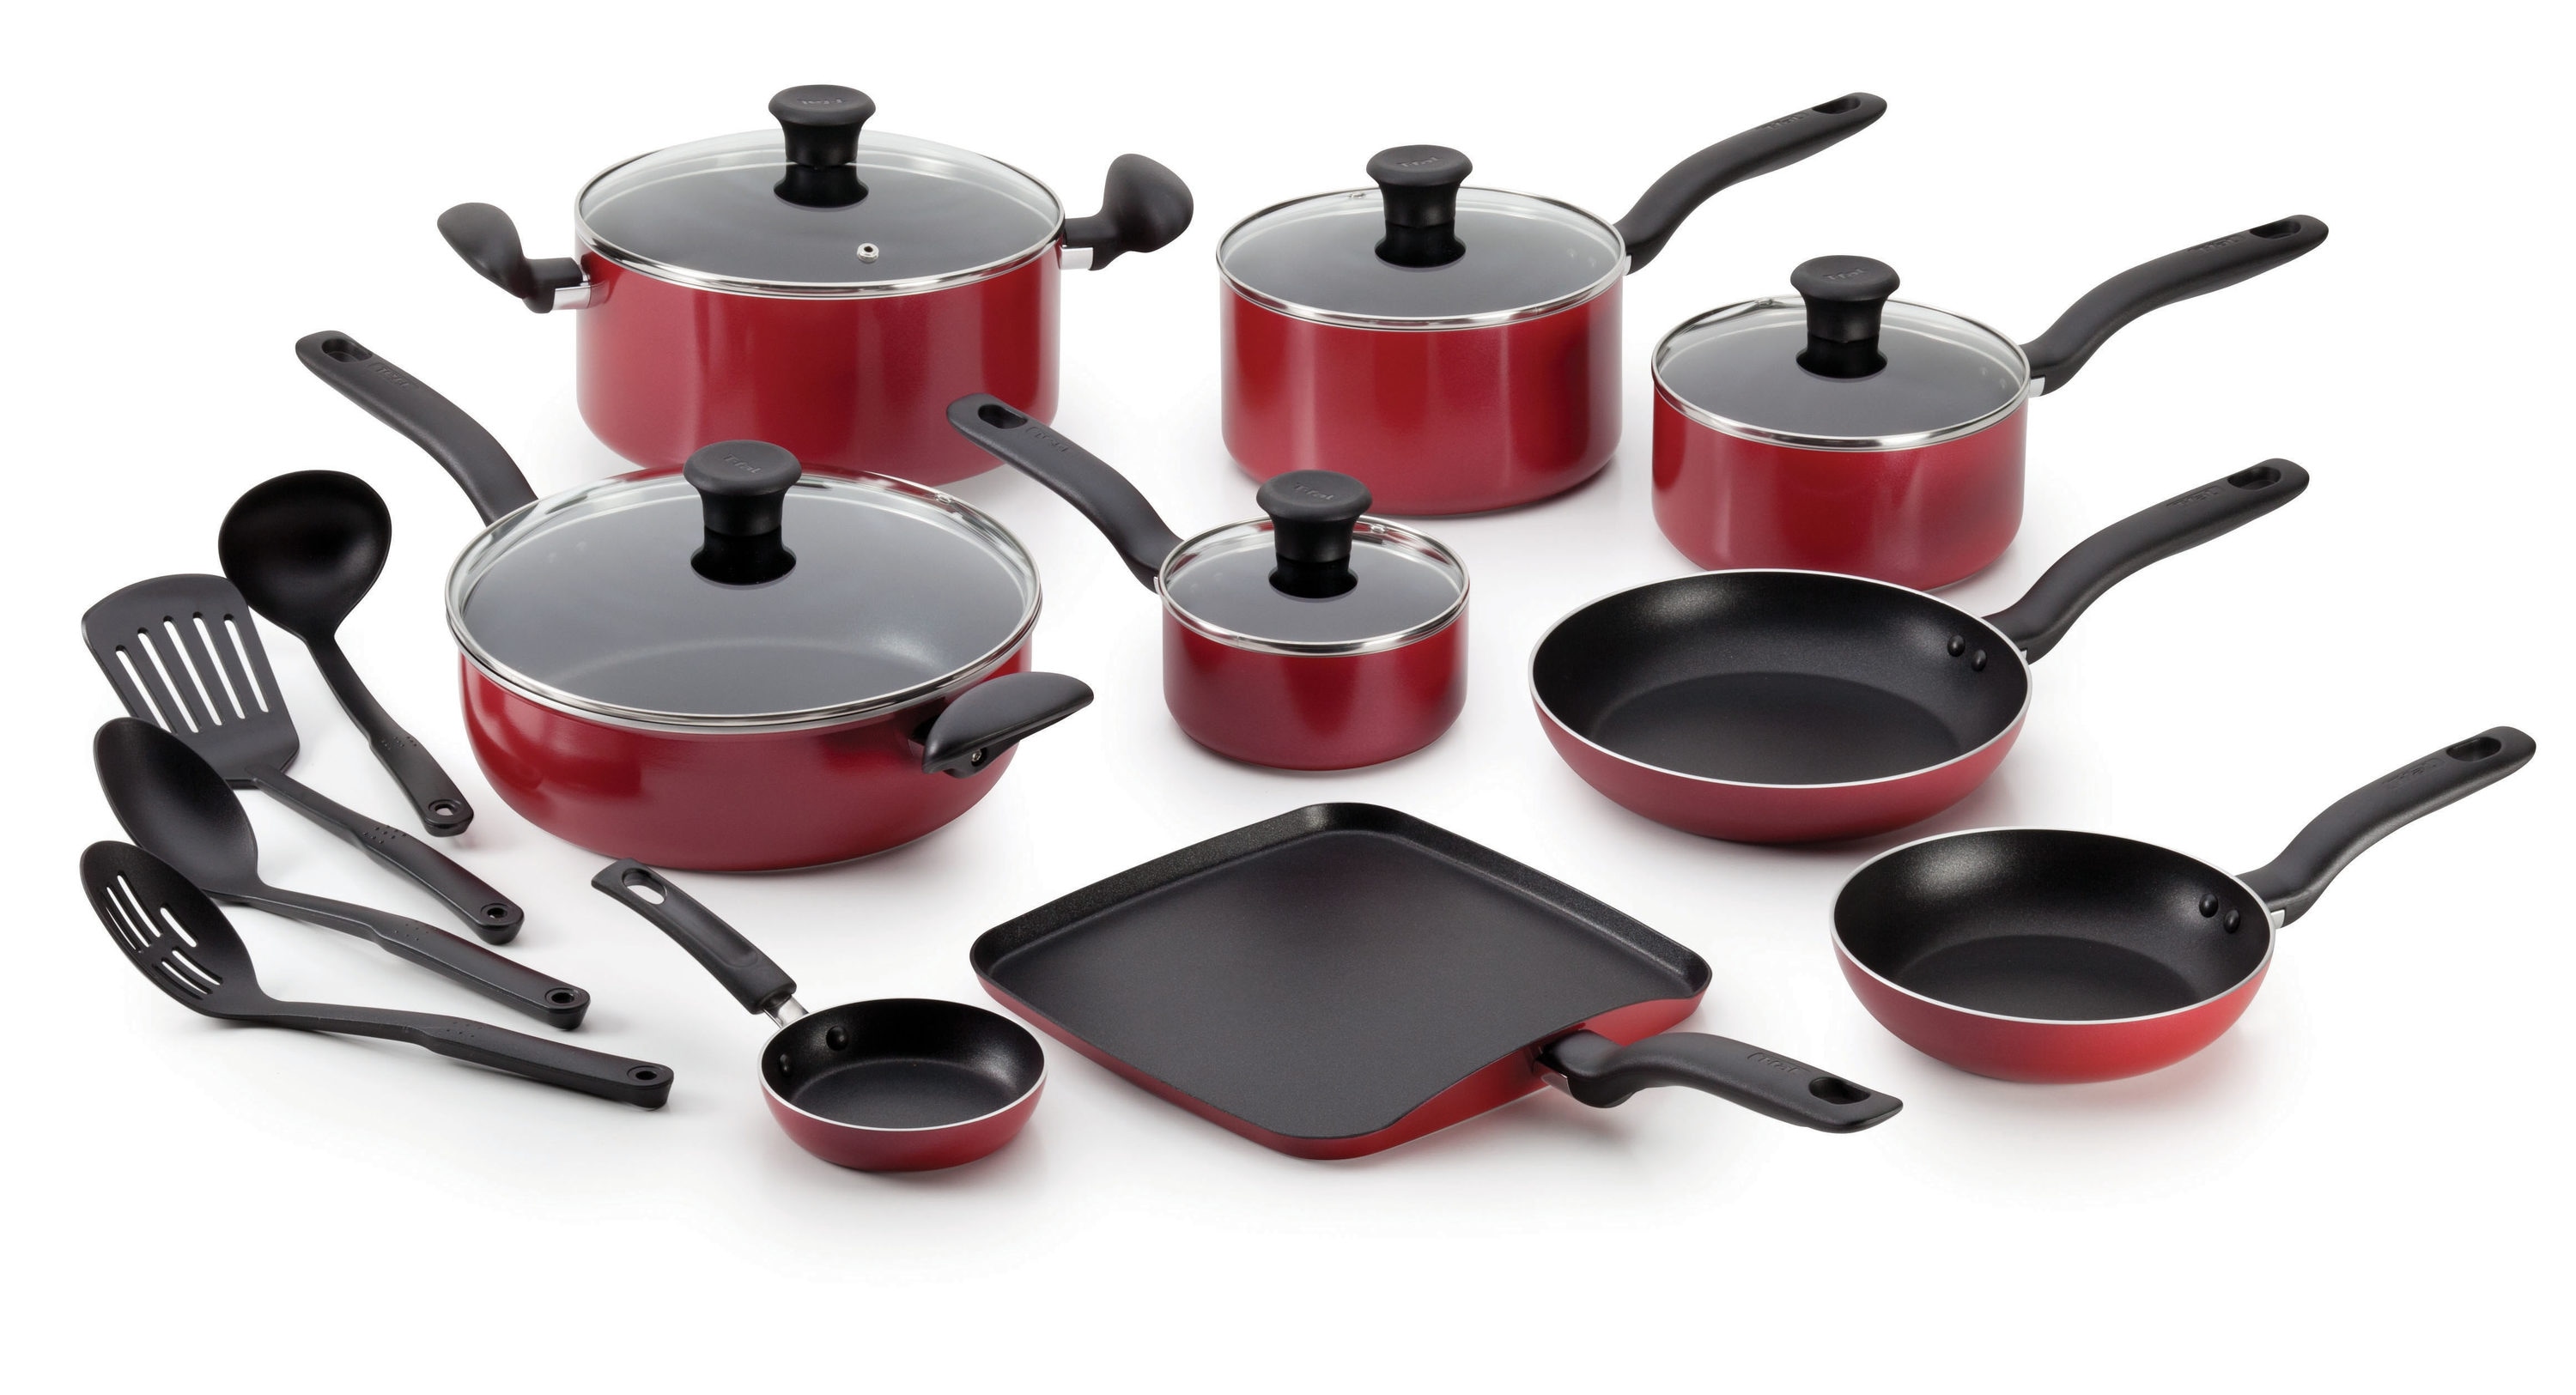 Rachael Ray 11-inch Nonstick Square Griddle Pan, Aluminum, Red, Cook + Create Collection